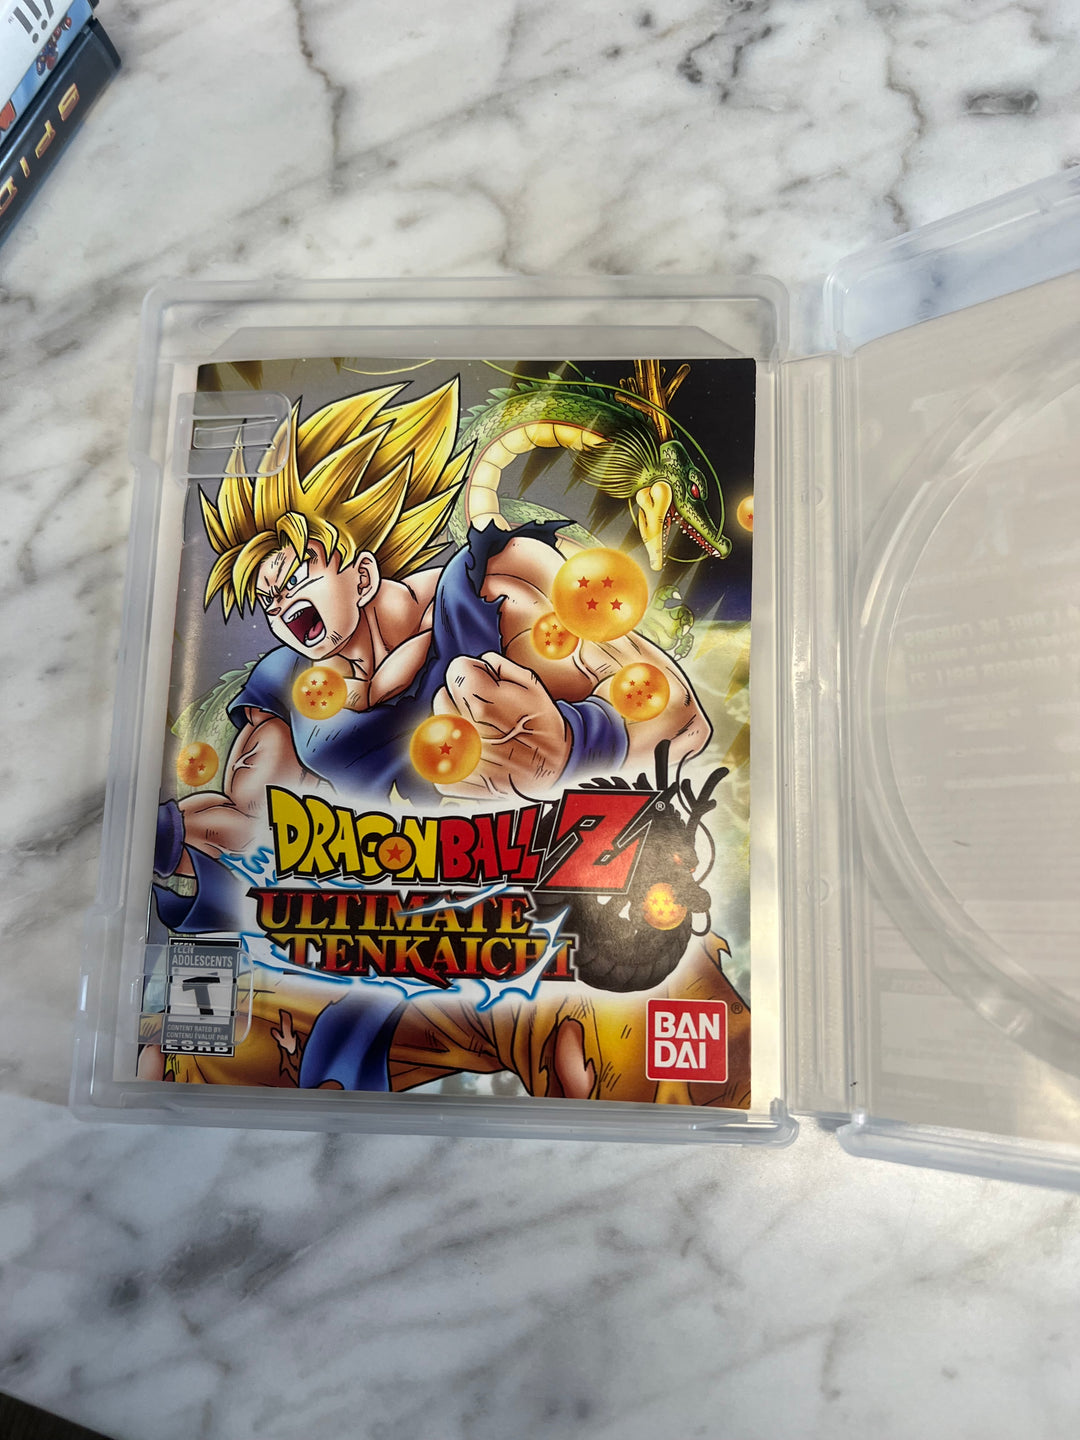 Dragonball Z Ultimate Tenkaichi for PS3 Playstation 3 Case and manual only